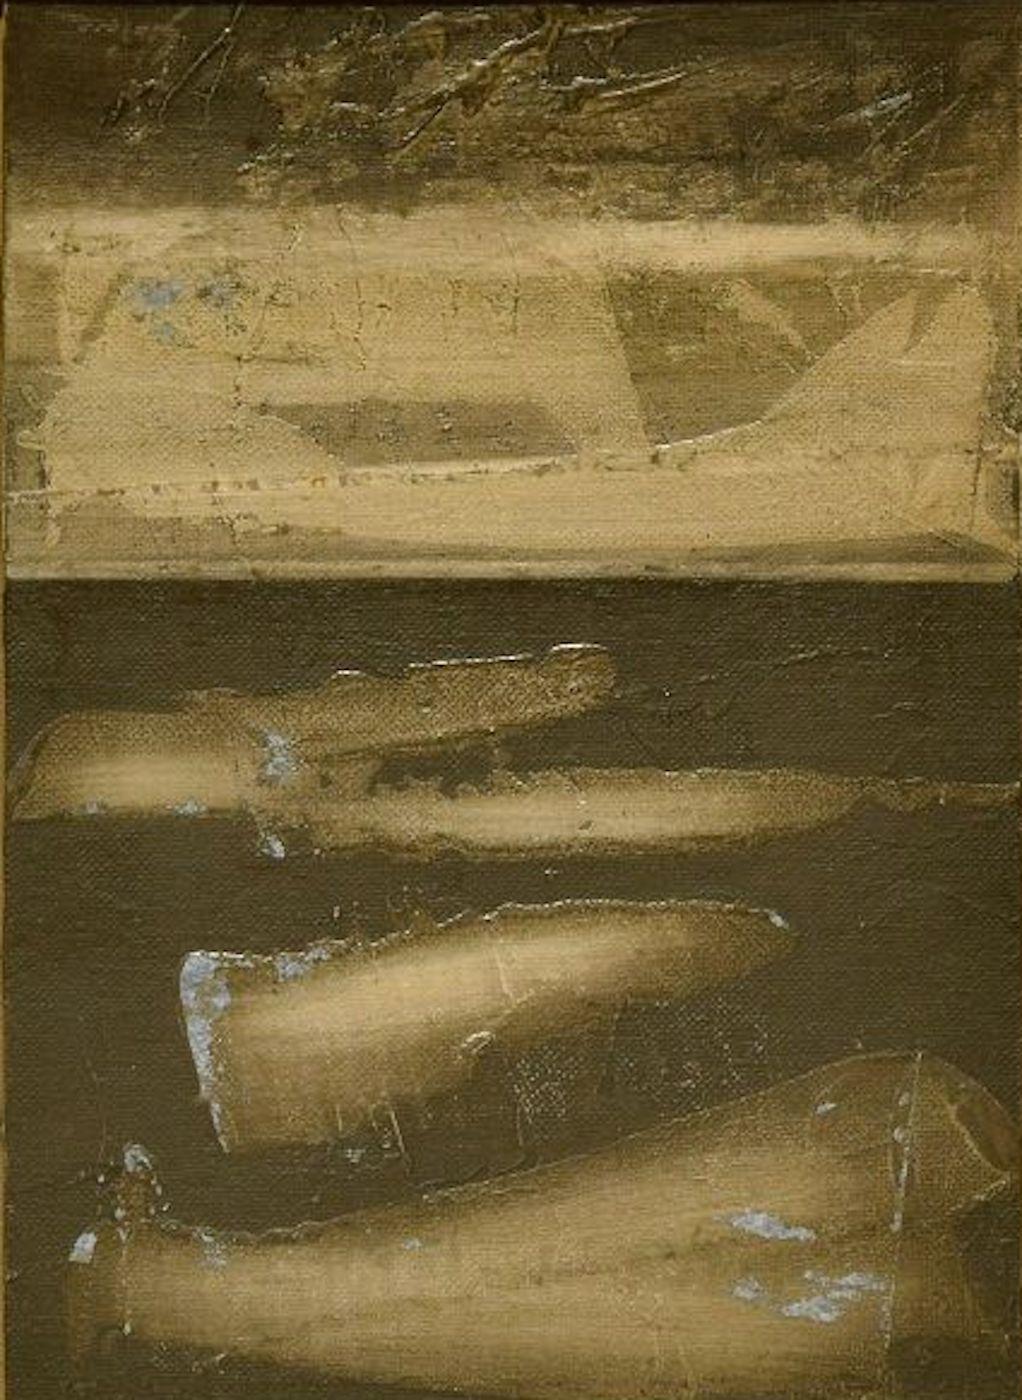 Image dimensions: 29 x 19 cm.

Black composition is a beautiful original mixed media on canvas, realized by Mario Sinisca (Naples, 1929), an Italian post-war master that can not be labeled in any artistic current.

This a superb original painting